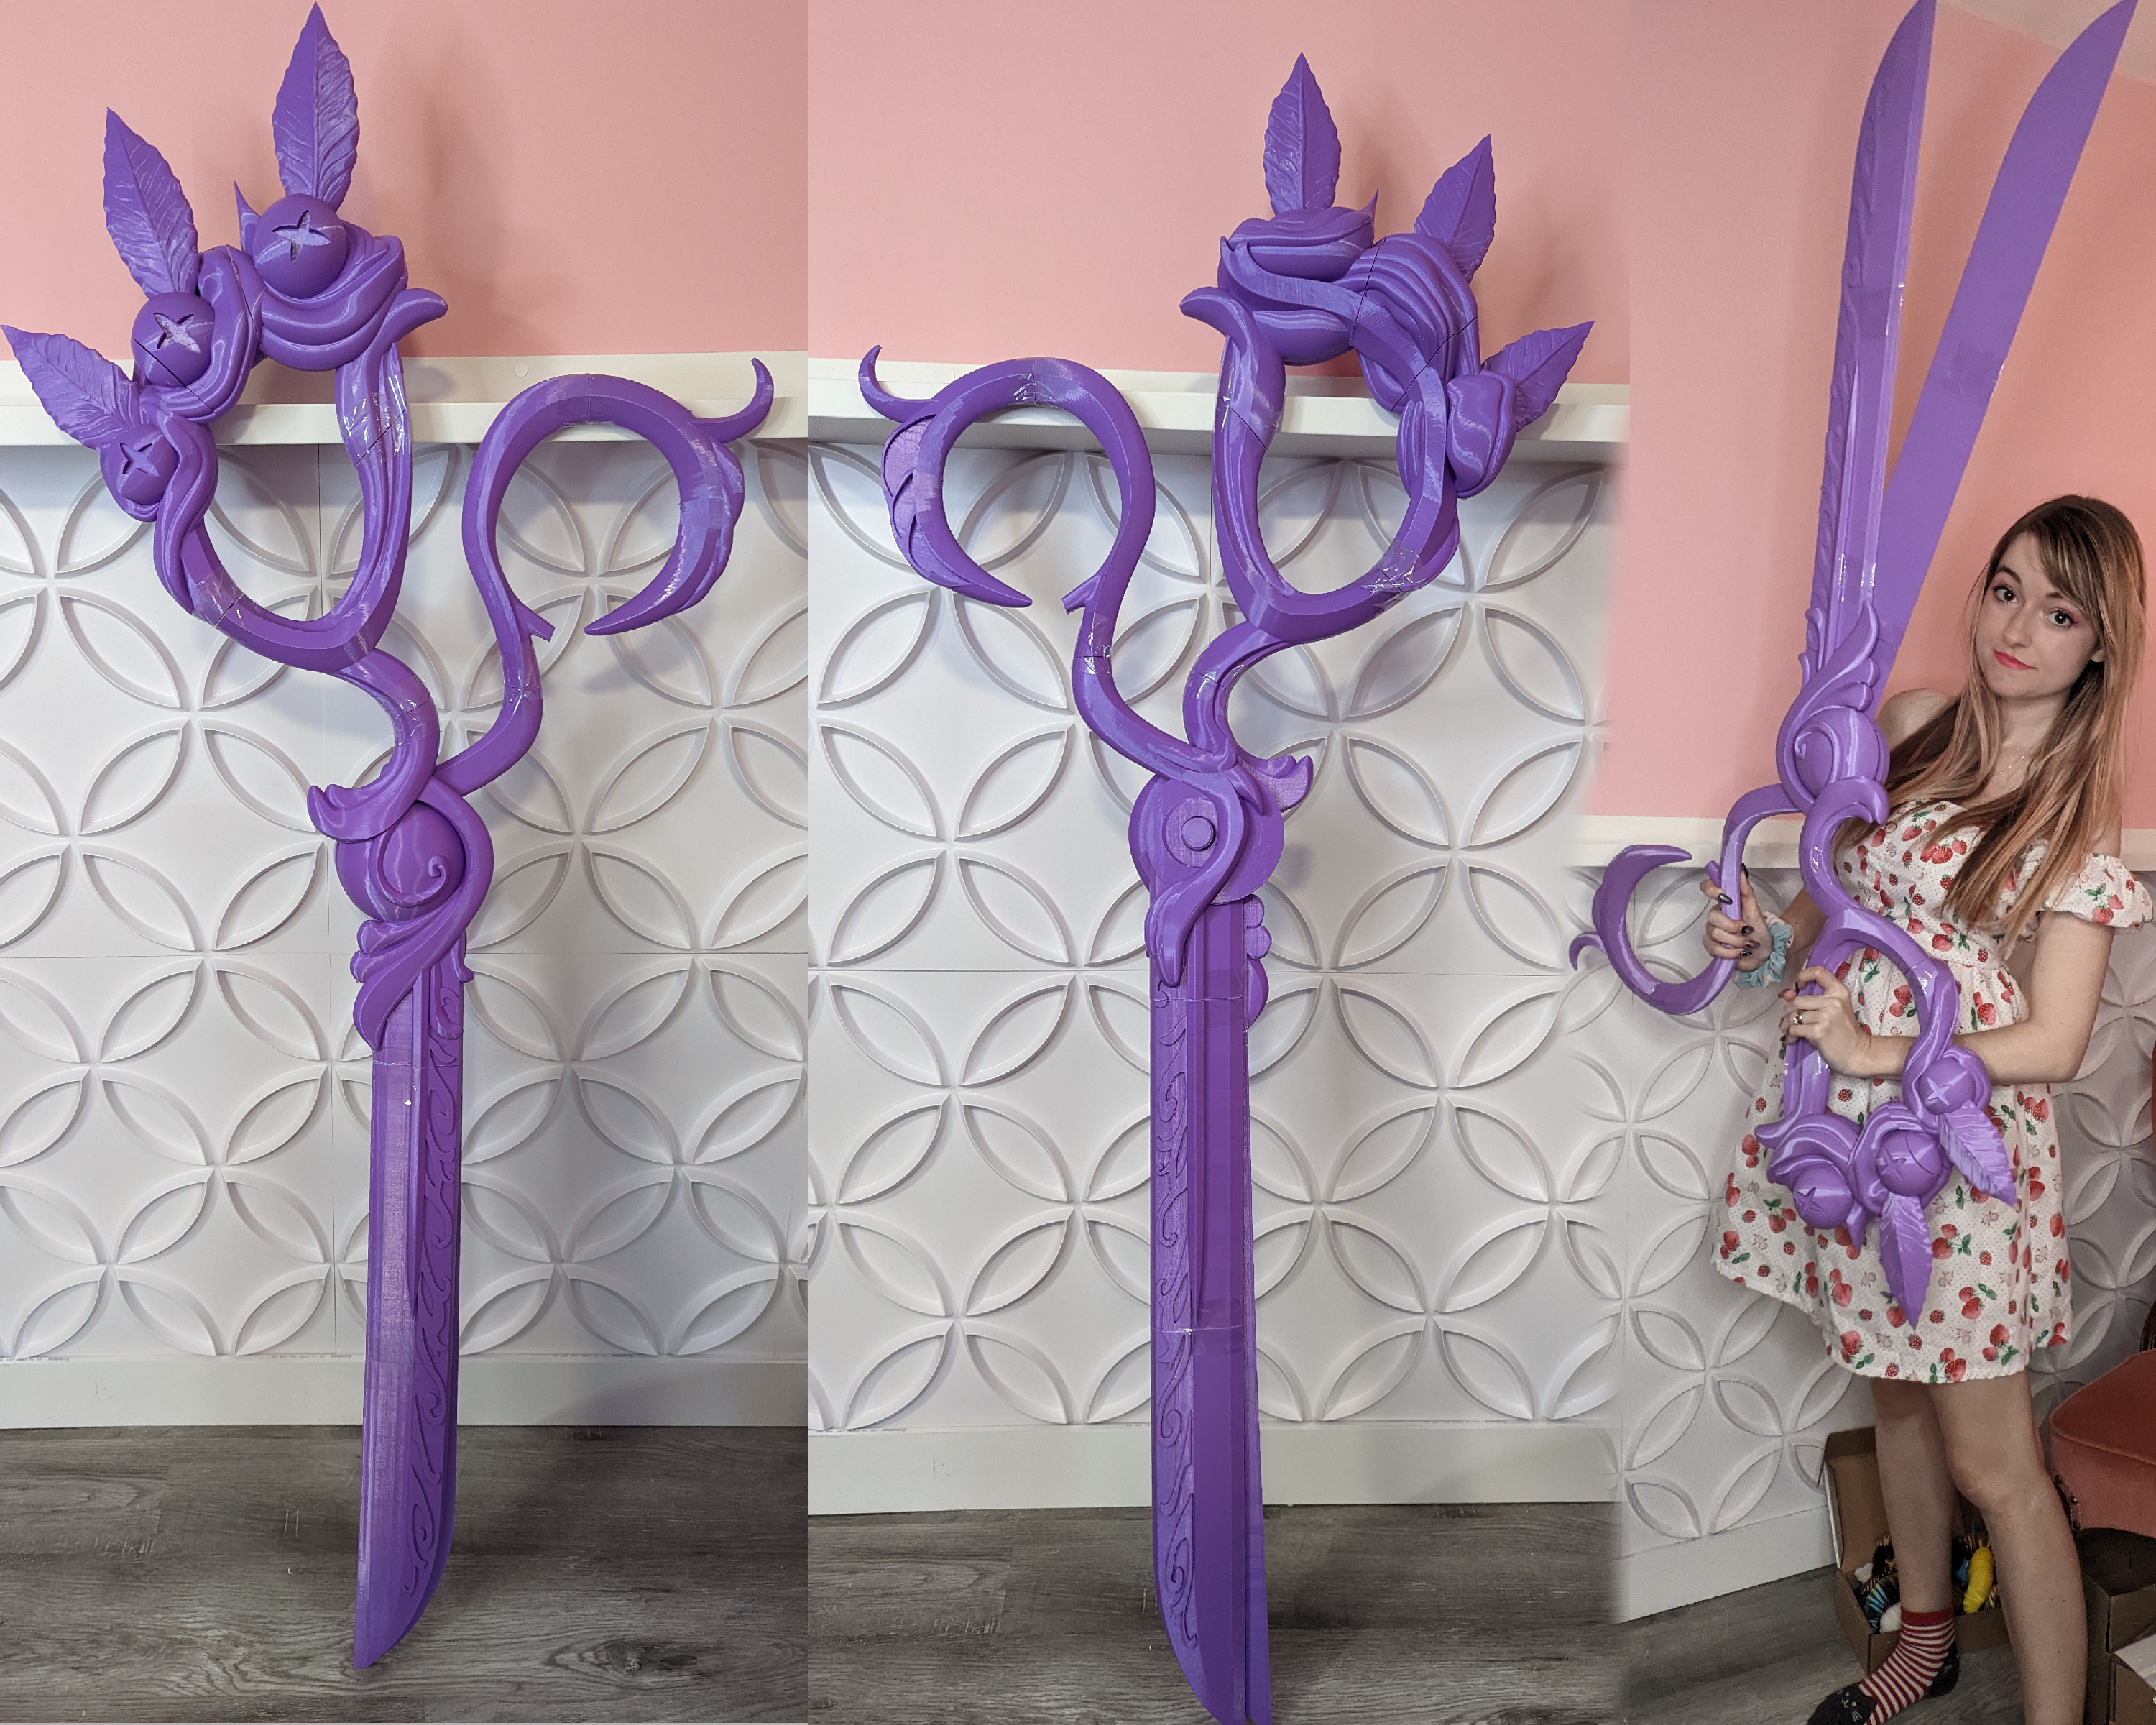 Self] Made Gwen's scissors for a friend. 7 ft tall, the whole build is EVA  foam except the needle and diamonds which are 3d printed. Based it more on  the concept art